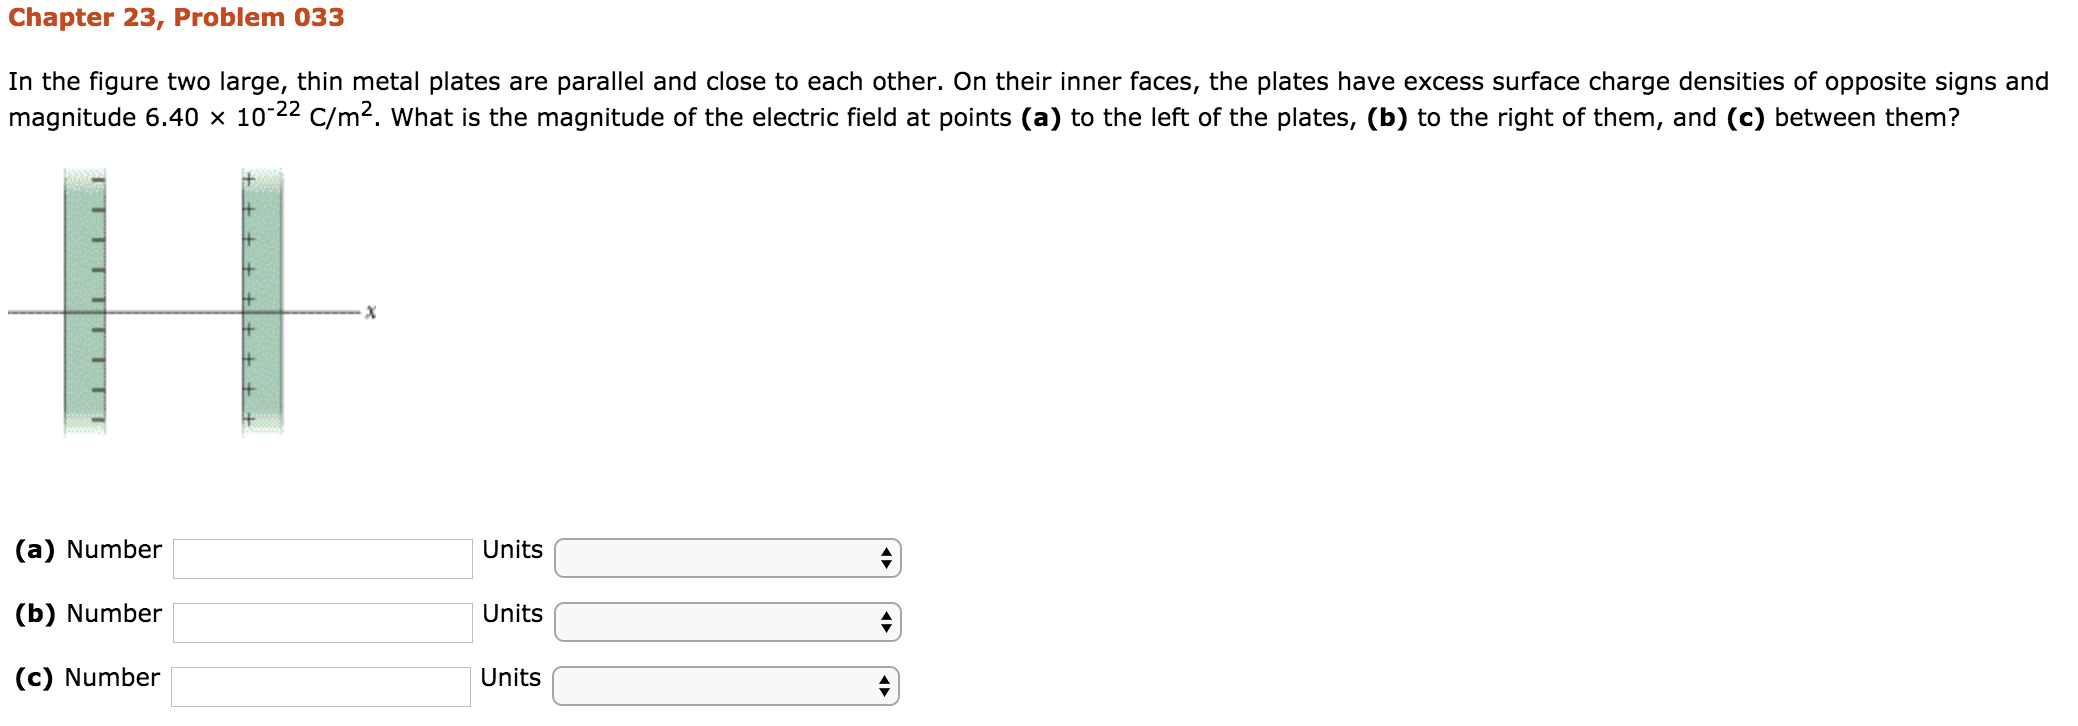 Chapter 23, Problem 033
In the figure two large, thin metal plates are parallel and close to each other. On their inner faces, the plates have excess surface charge densities of opposite signs and
magnitude 6.40 × 10-22 C/m2, what is the magnitude of the electric field at points (a) tổ the left of the plates, (b) tố the right of them, and (c) between them?
(a) Number
(b) Number
(c) Number
Units
Units
Units
